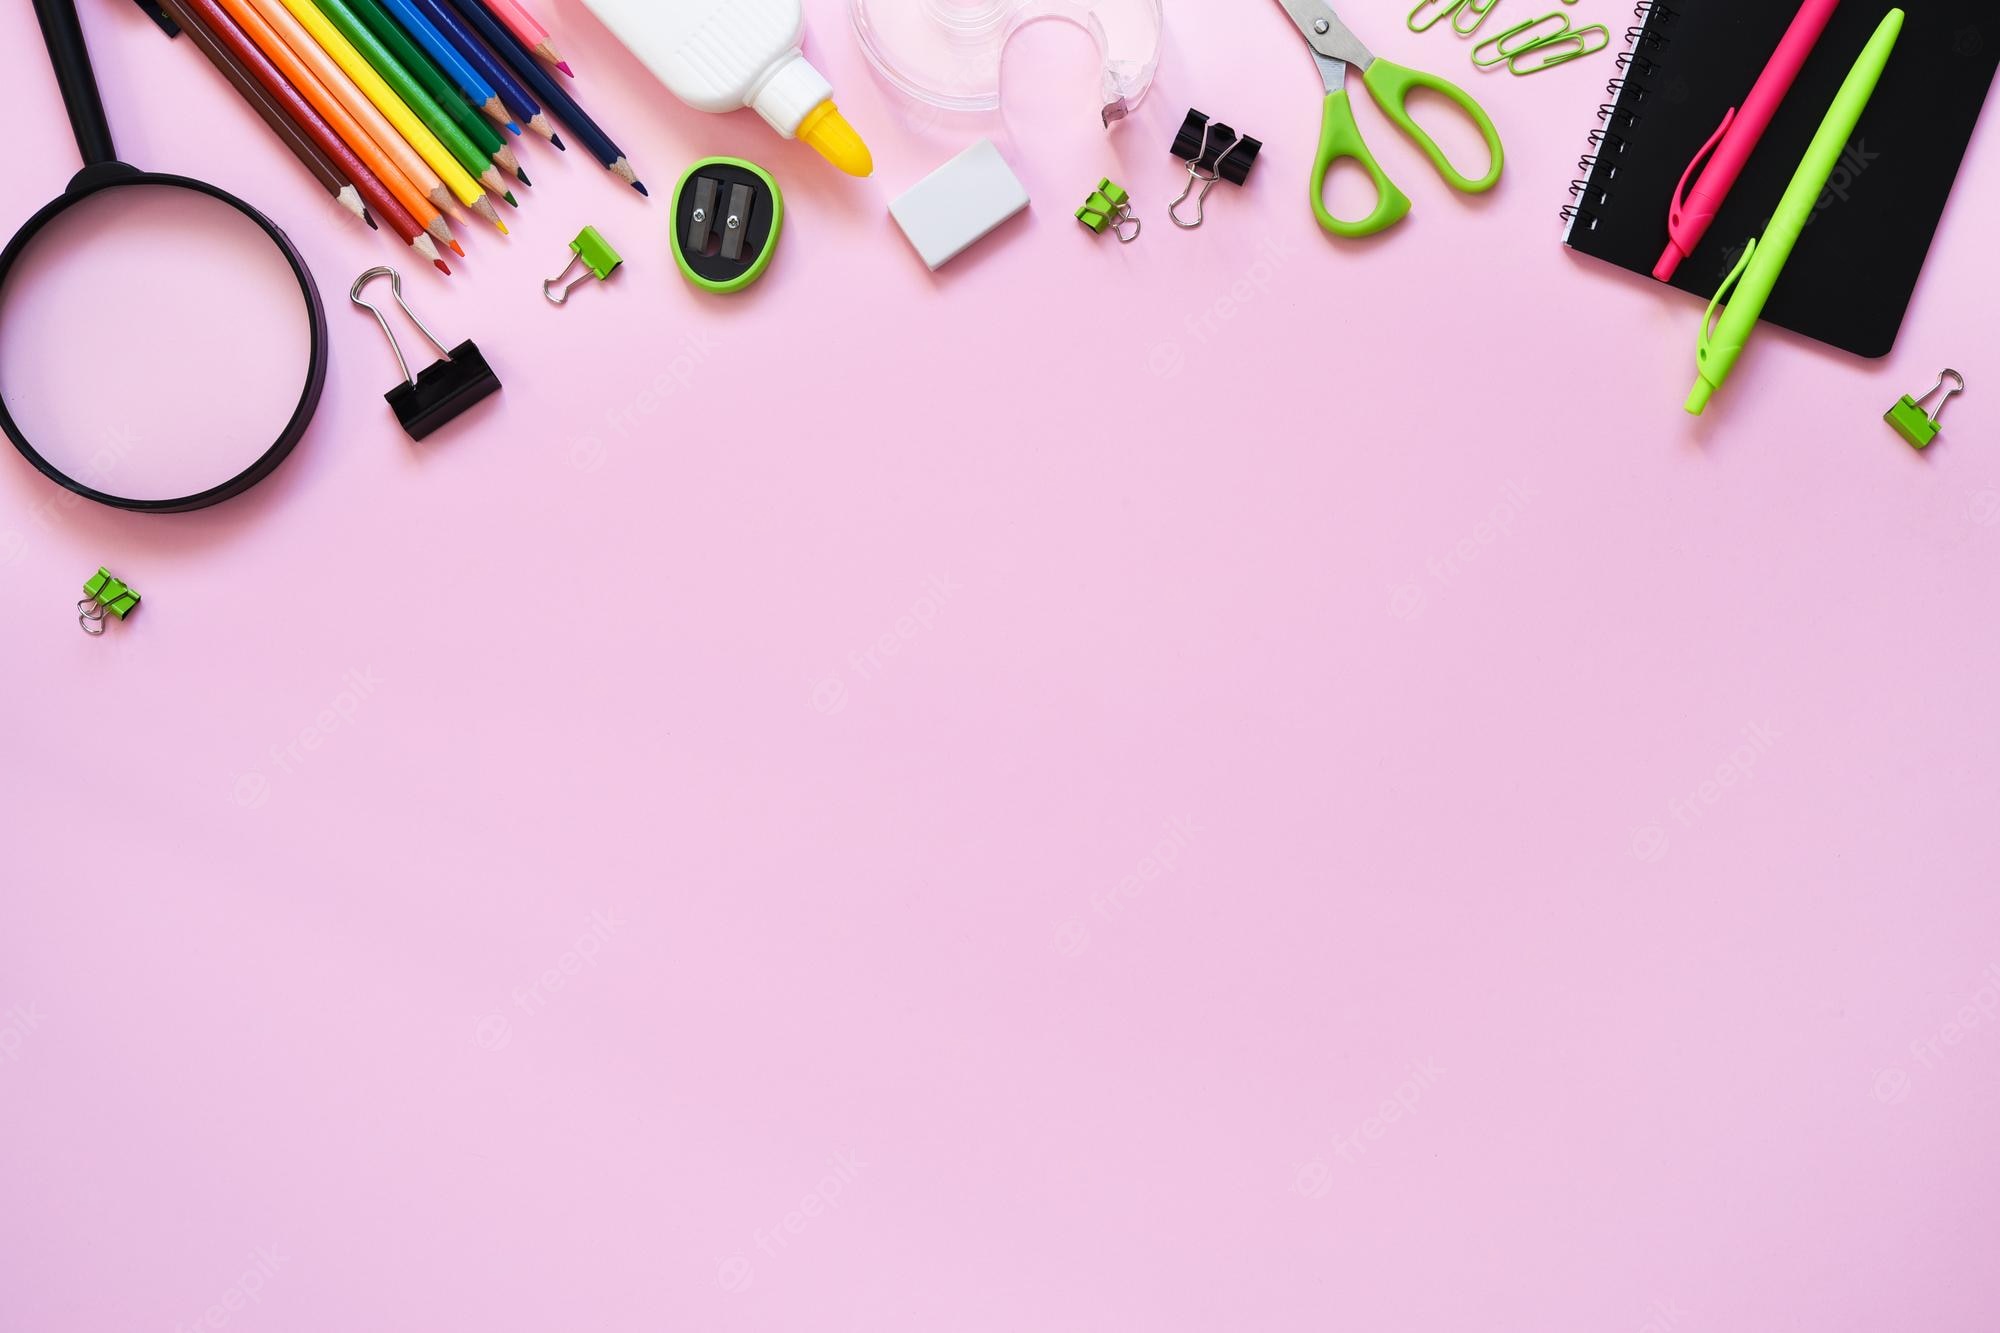 Premium Photo. School supplies on a paper pink background back to school